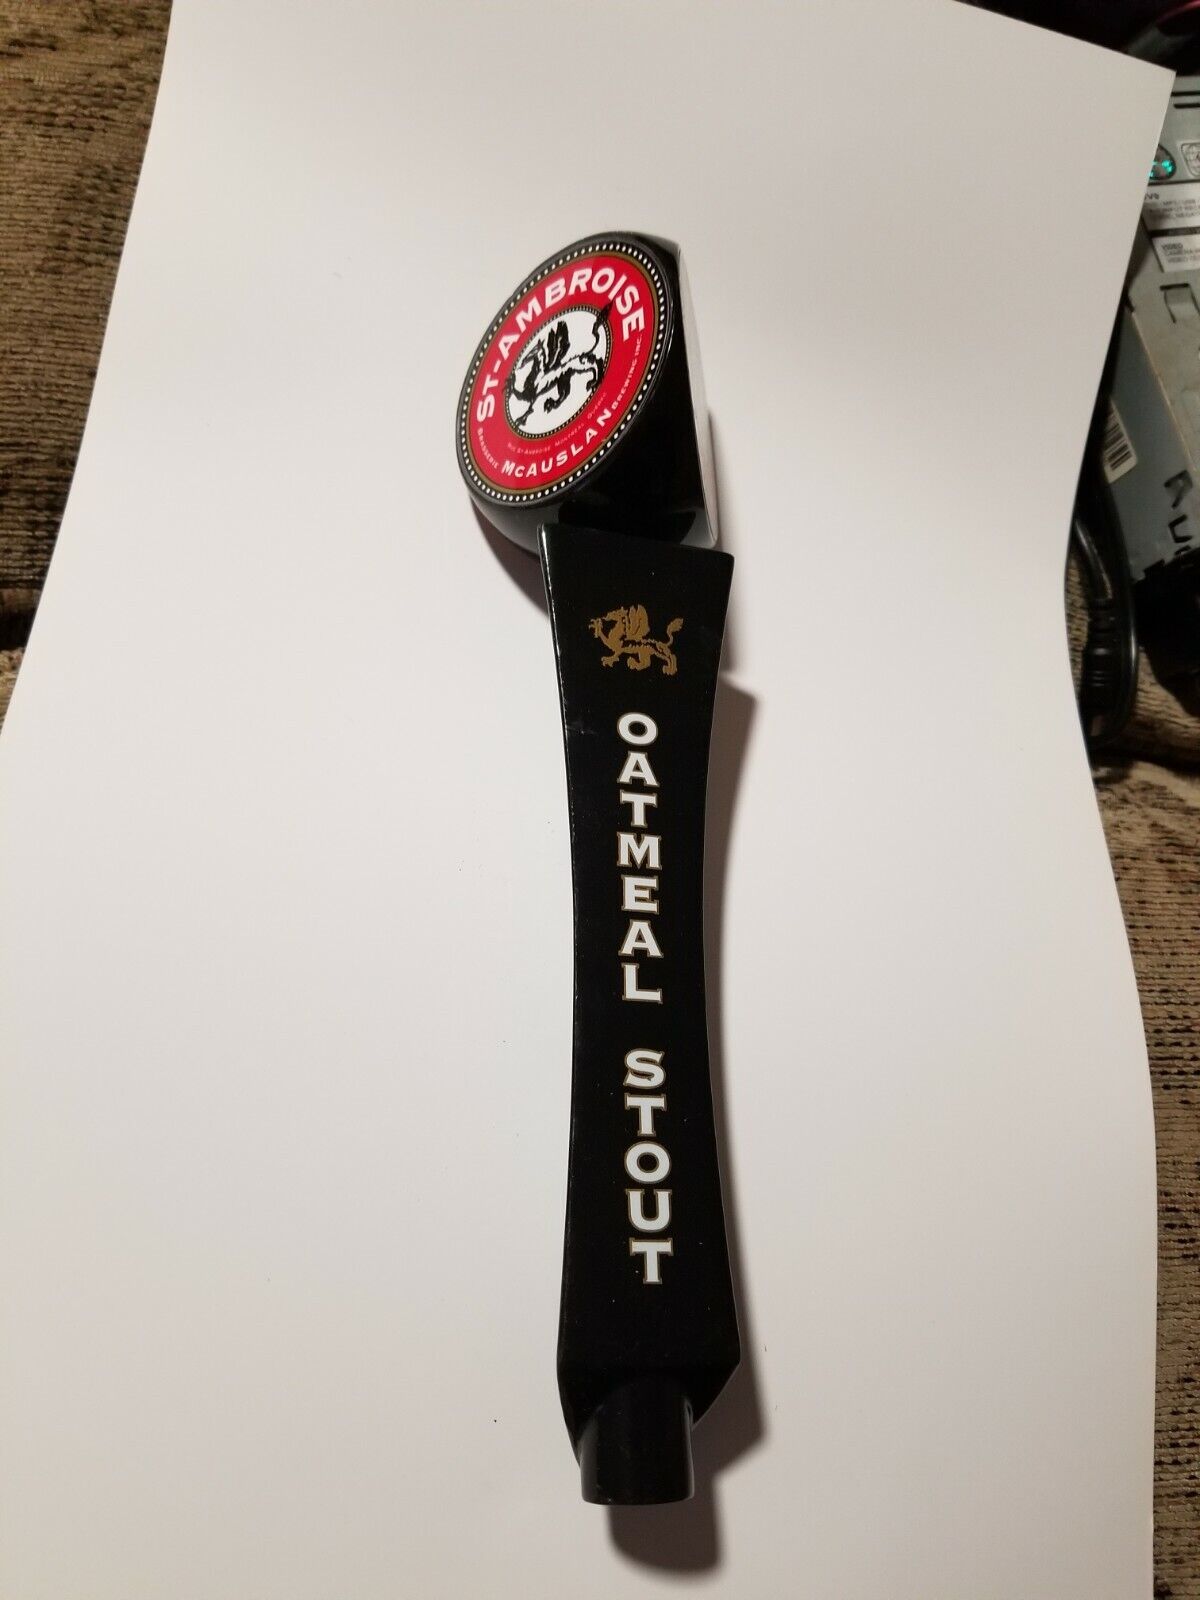 Very RARE St Ambroise Oatmeal Stout 3 Sided Tap Handle